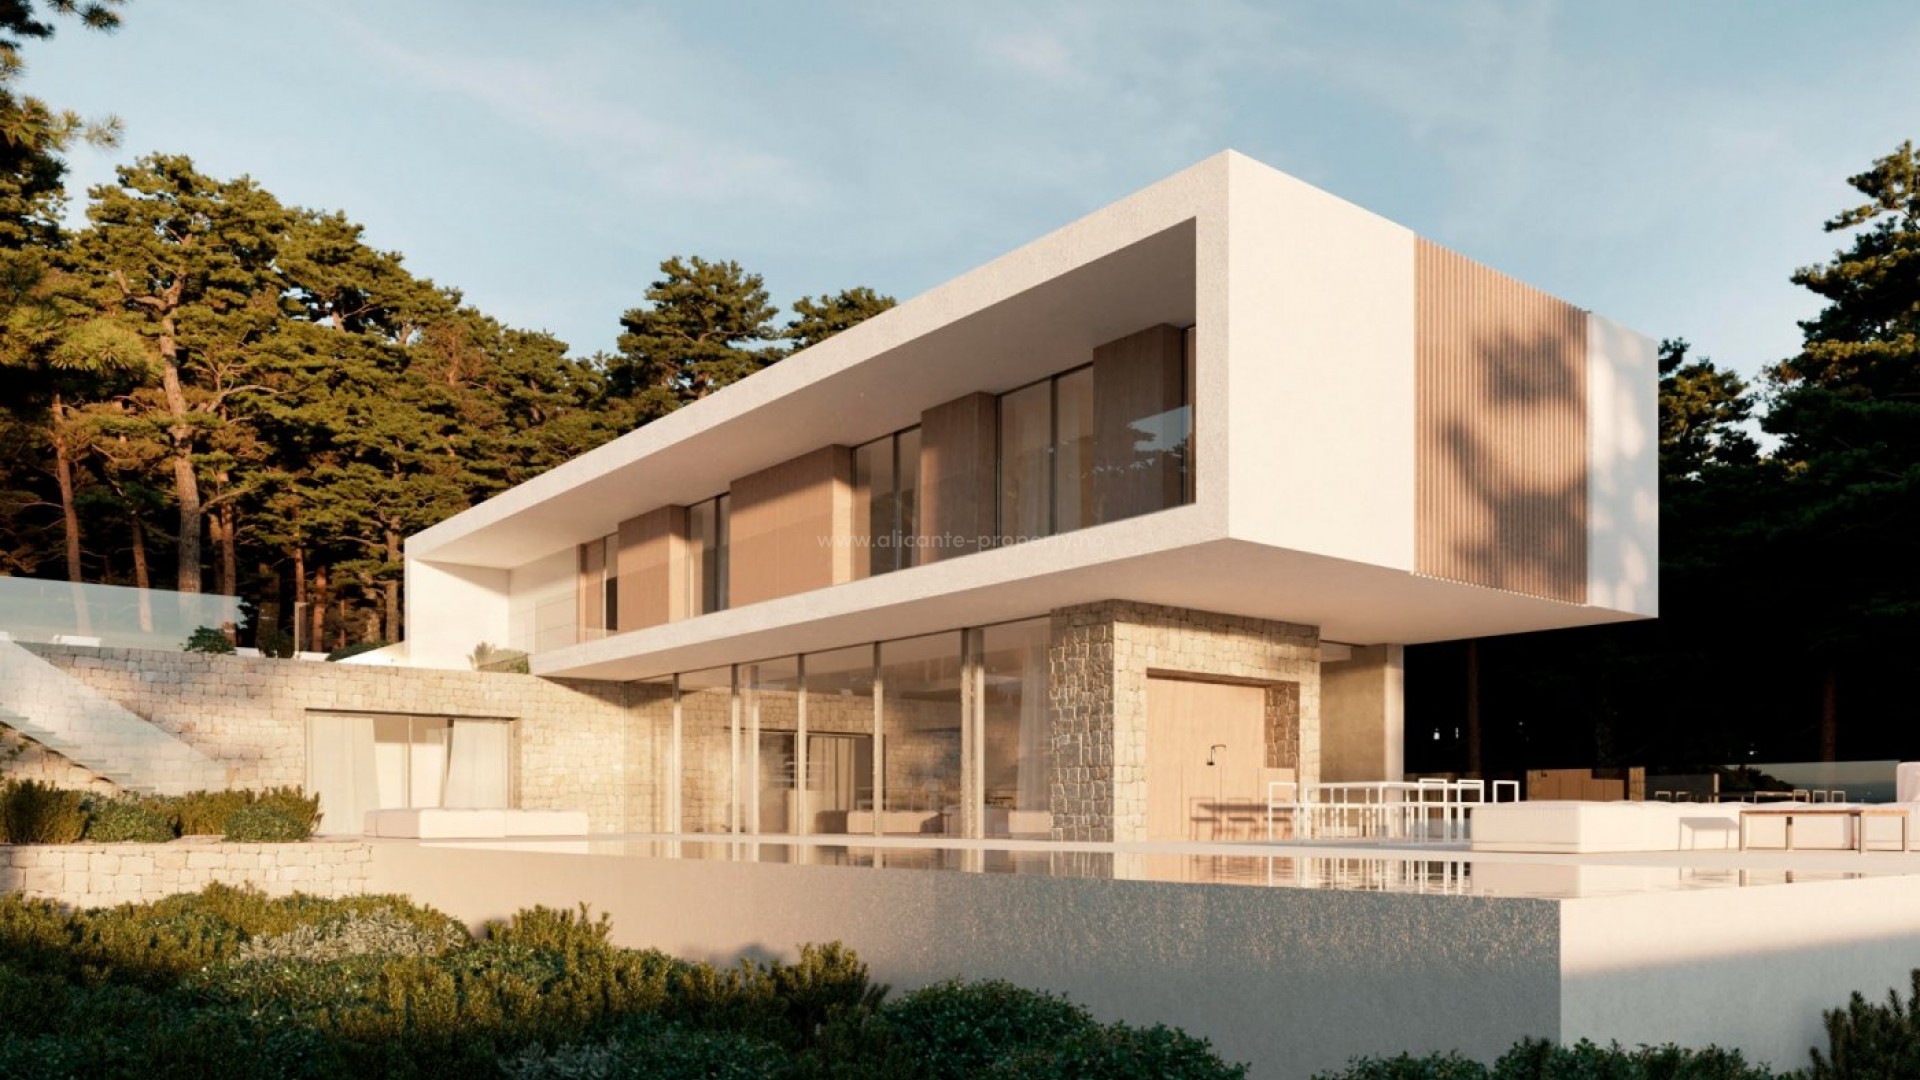 Luxury villa in Moraira with 3 floors, 5 bedrooms, 4 bathrooms, a total of 544m2, swimming pool with barbecue area, double garage. Everything very modern